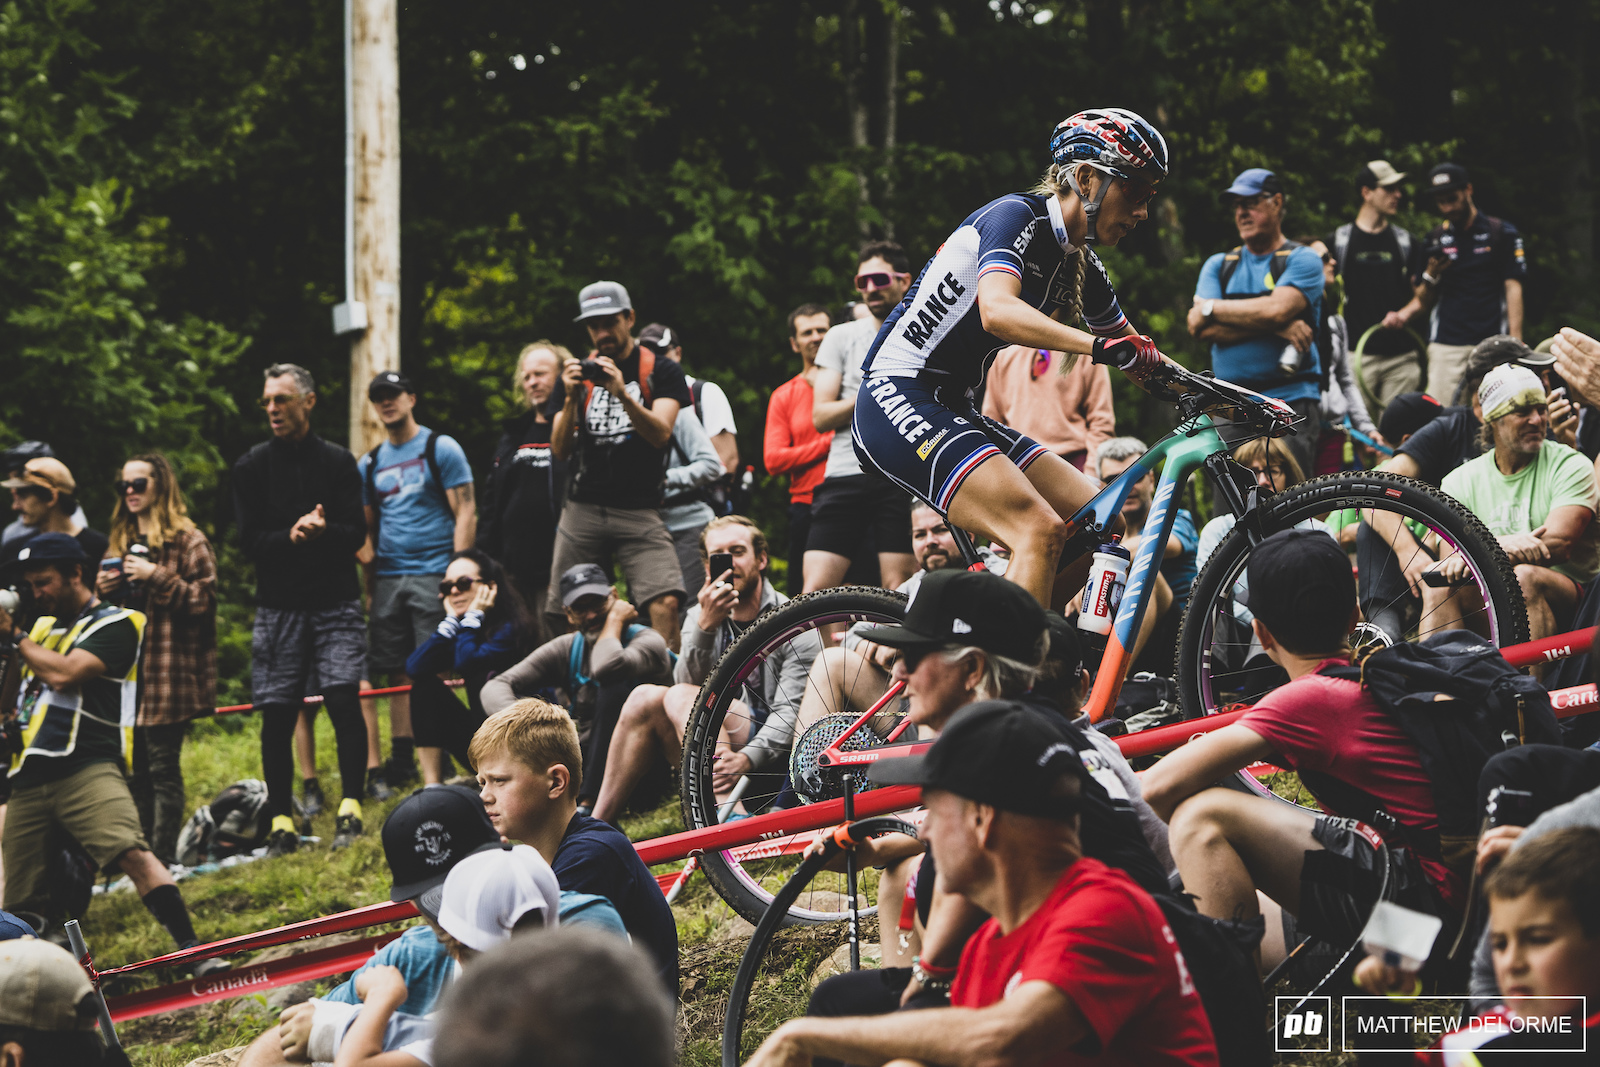 Pauline Ferrand Prevot worked her way up from the third row to take the win.